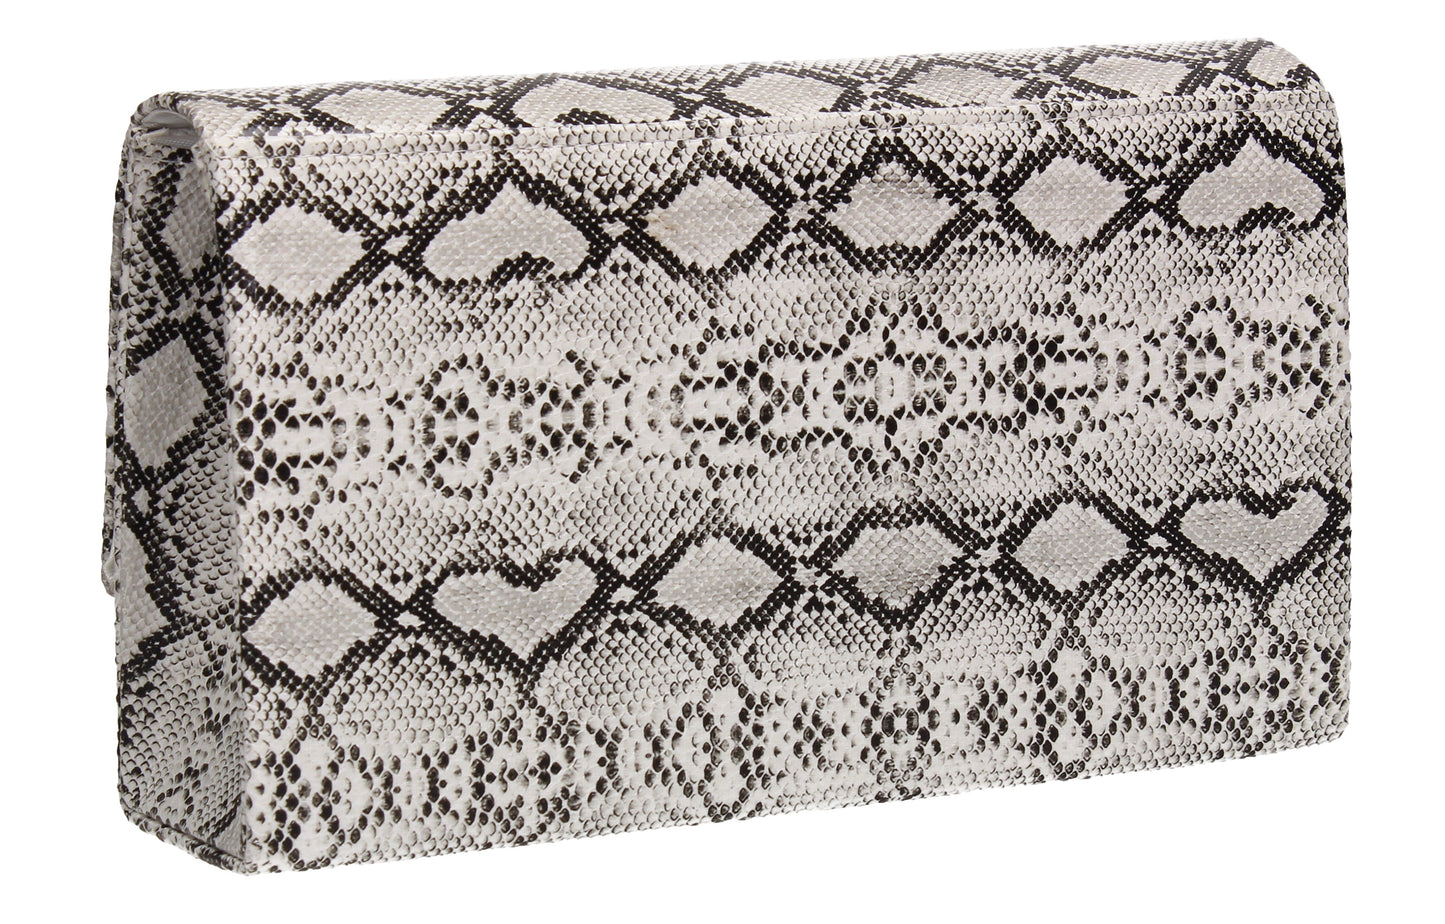 Tana Faux Leather Animal Style Clutch Bag White